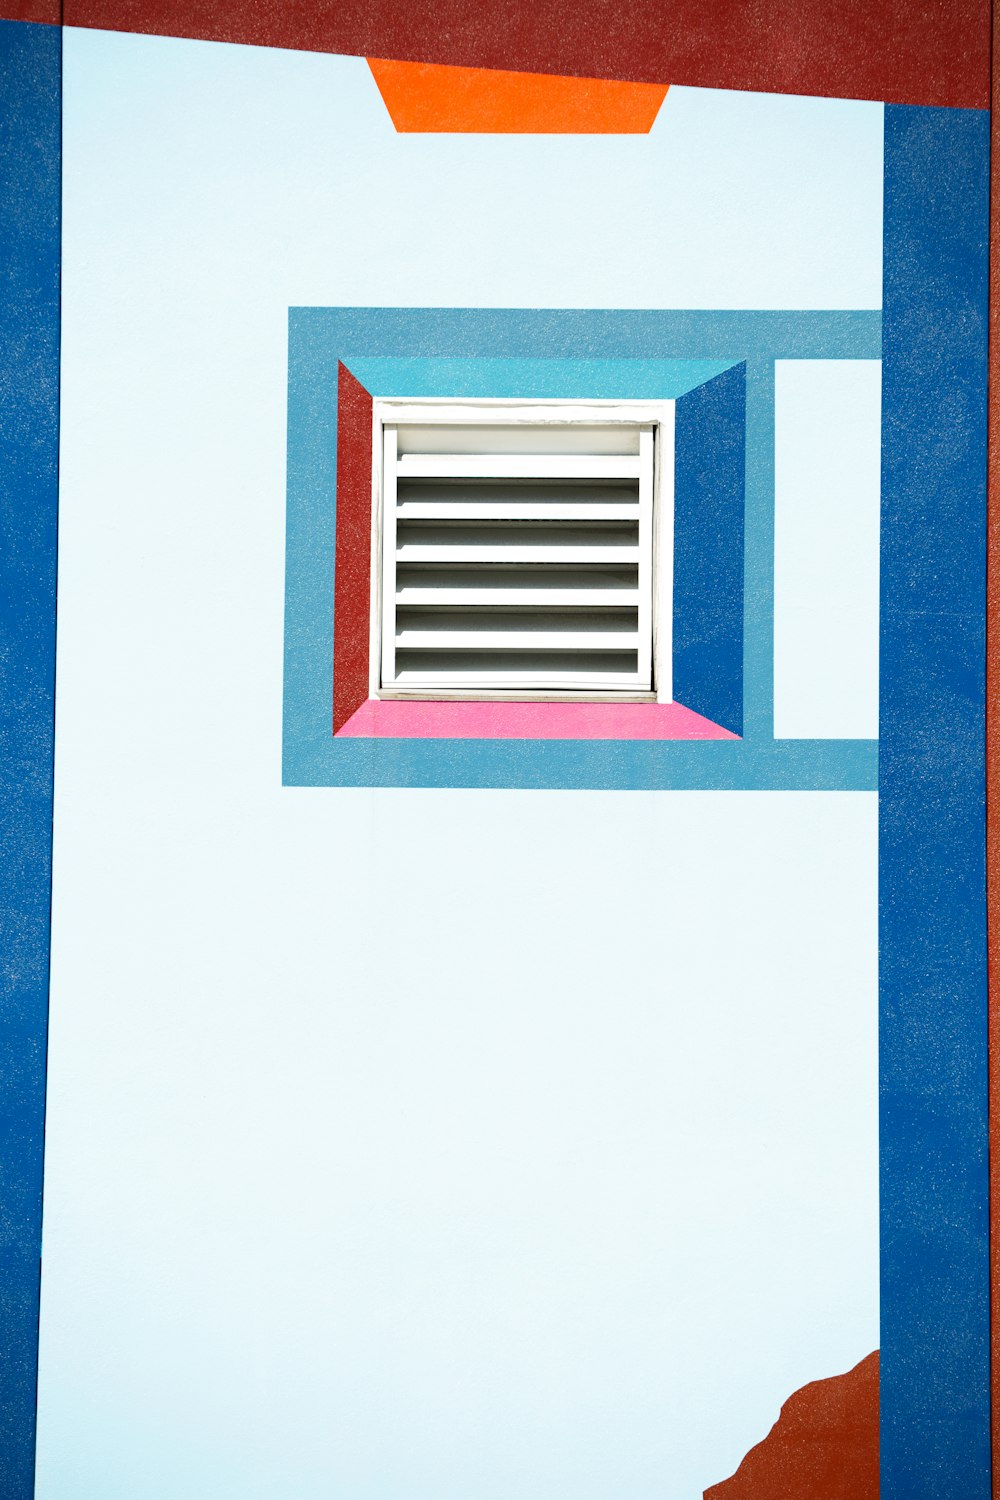 a painting of a window with a red and blue frame